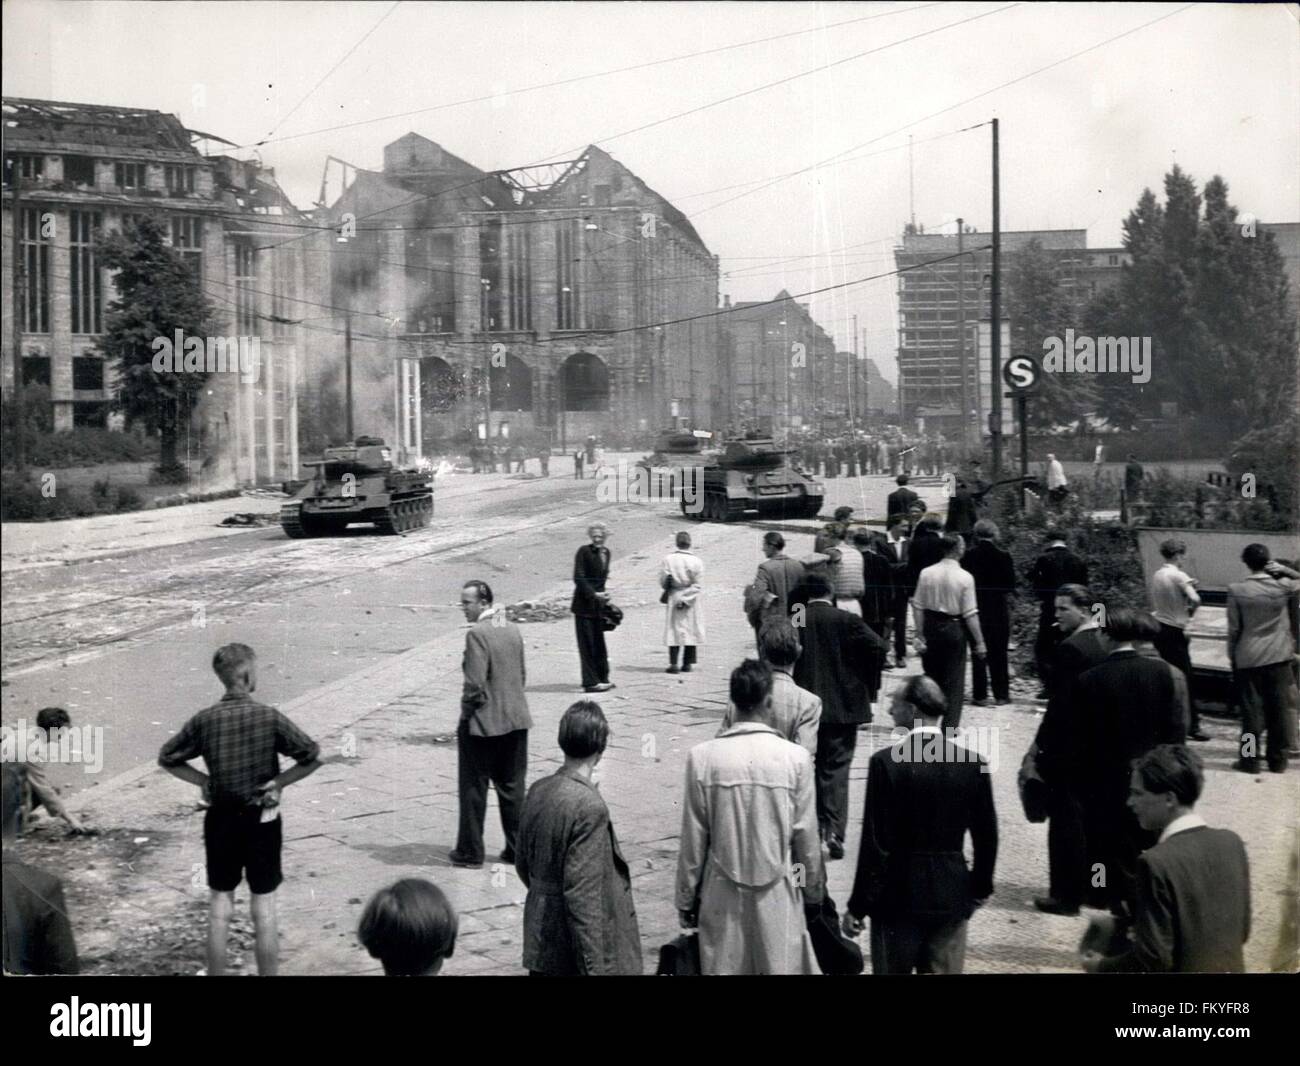 1953 - The situation of Berlin.: Demonstration and riots in East Berlin - June 18th 1953 . Soviet Occupation troops go into action against civilian population. Russian T-34 tanks seen blovking one of the streets in center of the East Berlin sector (Credit Image: © Keystone Pictures USA/ZUMAPRESS.com) Stock Photo